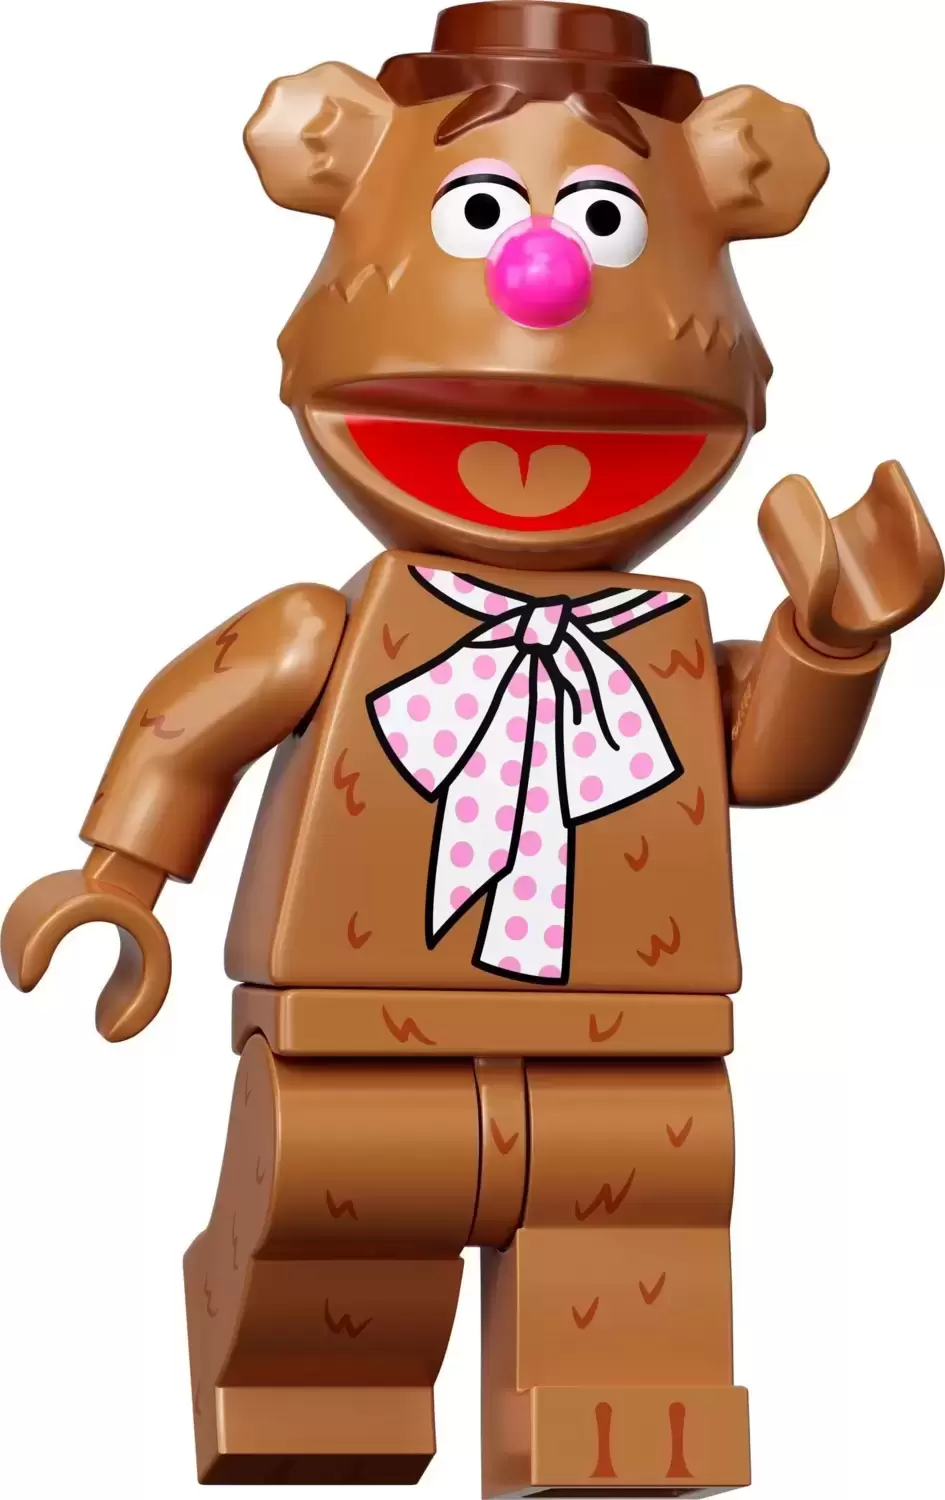 LEGO The Muppets Minifigures - Fozzie Bear